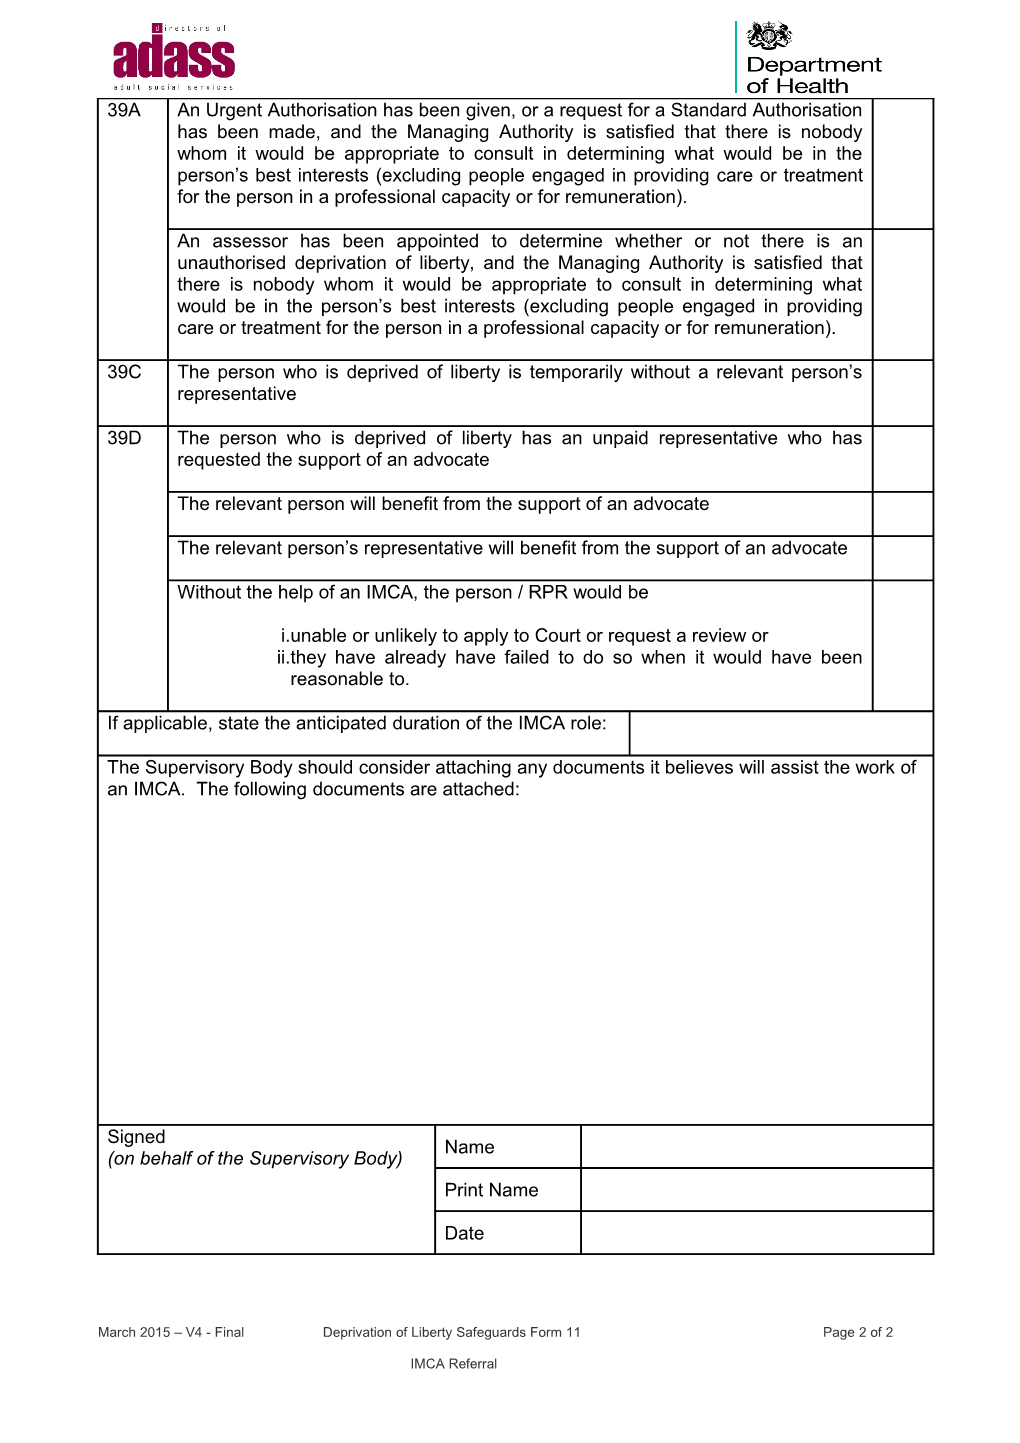 March 2015 V4 - Final Deprivation of Liberty Safeguards Form 11 Page 1 of 2